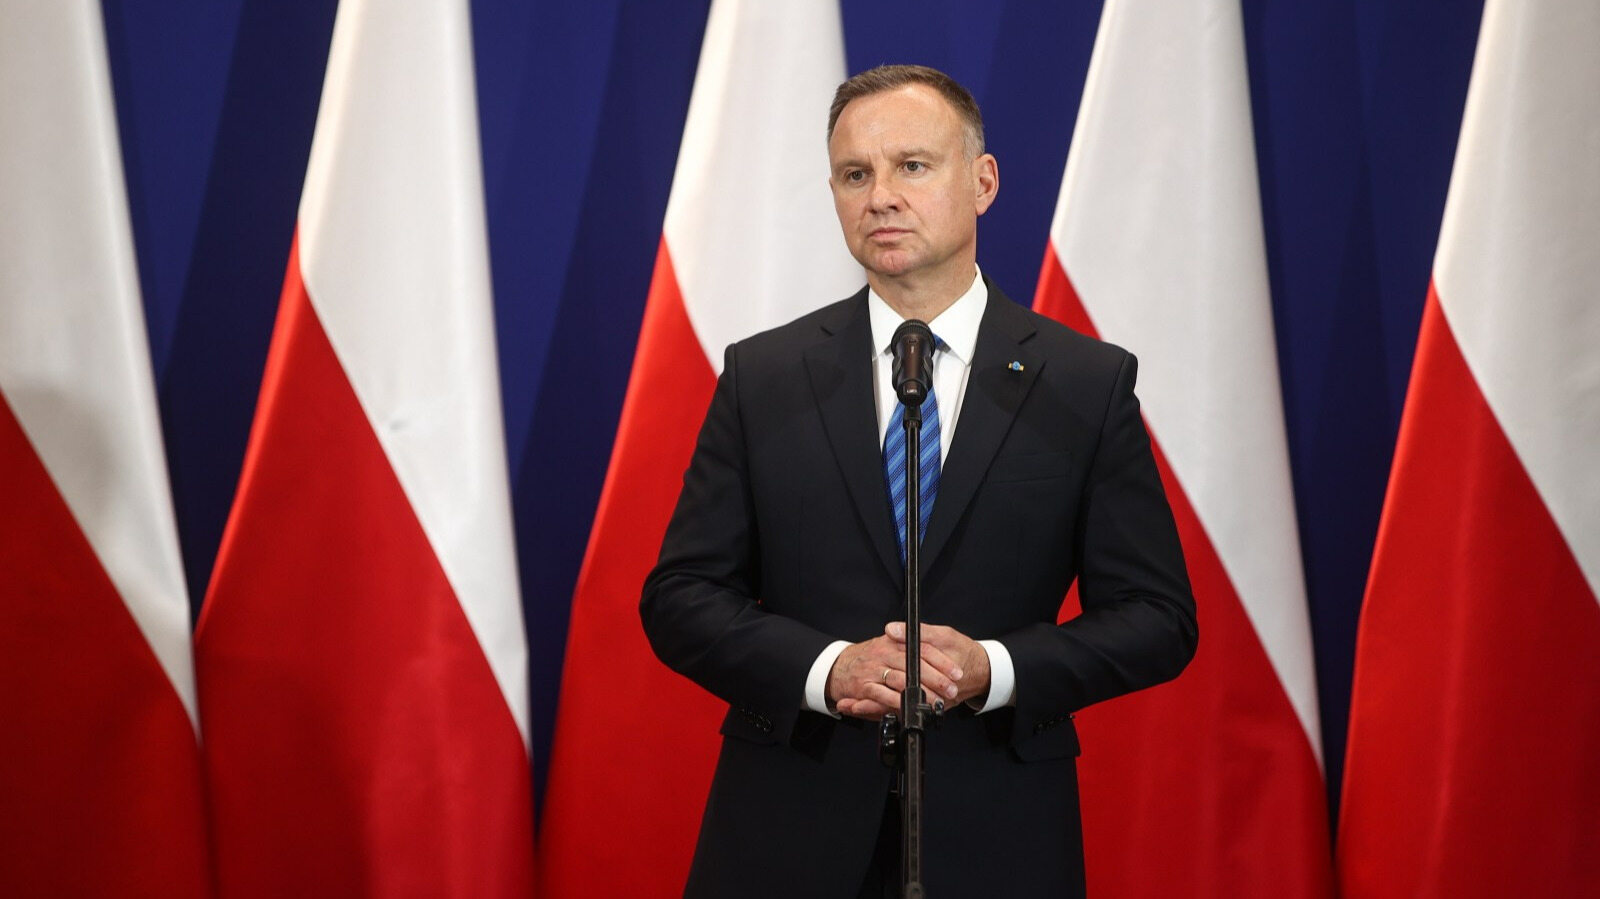 It's time for the parliamentary elections.  Andrzej Duda posted a meaningful entry